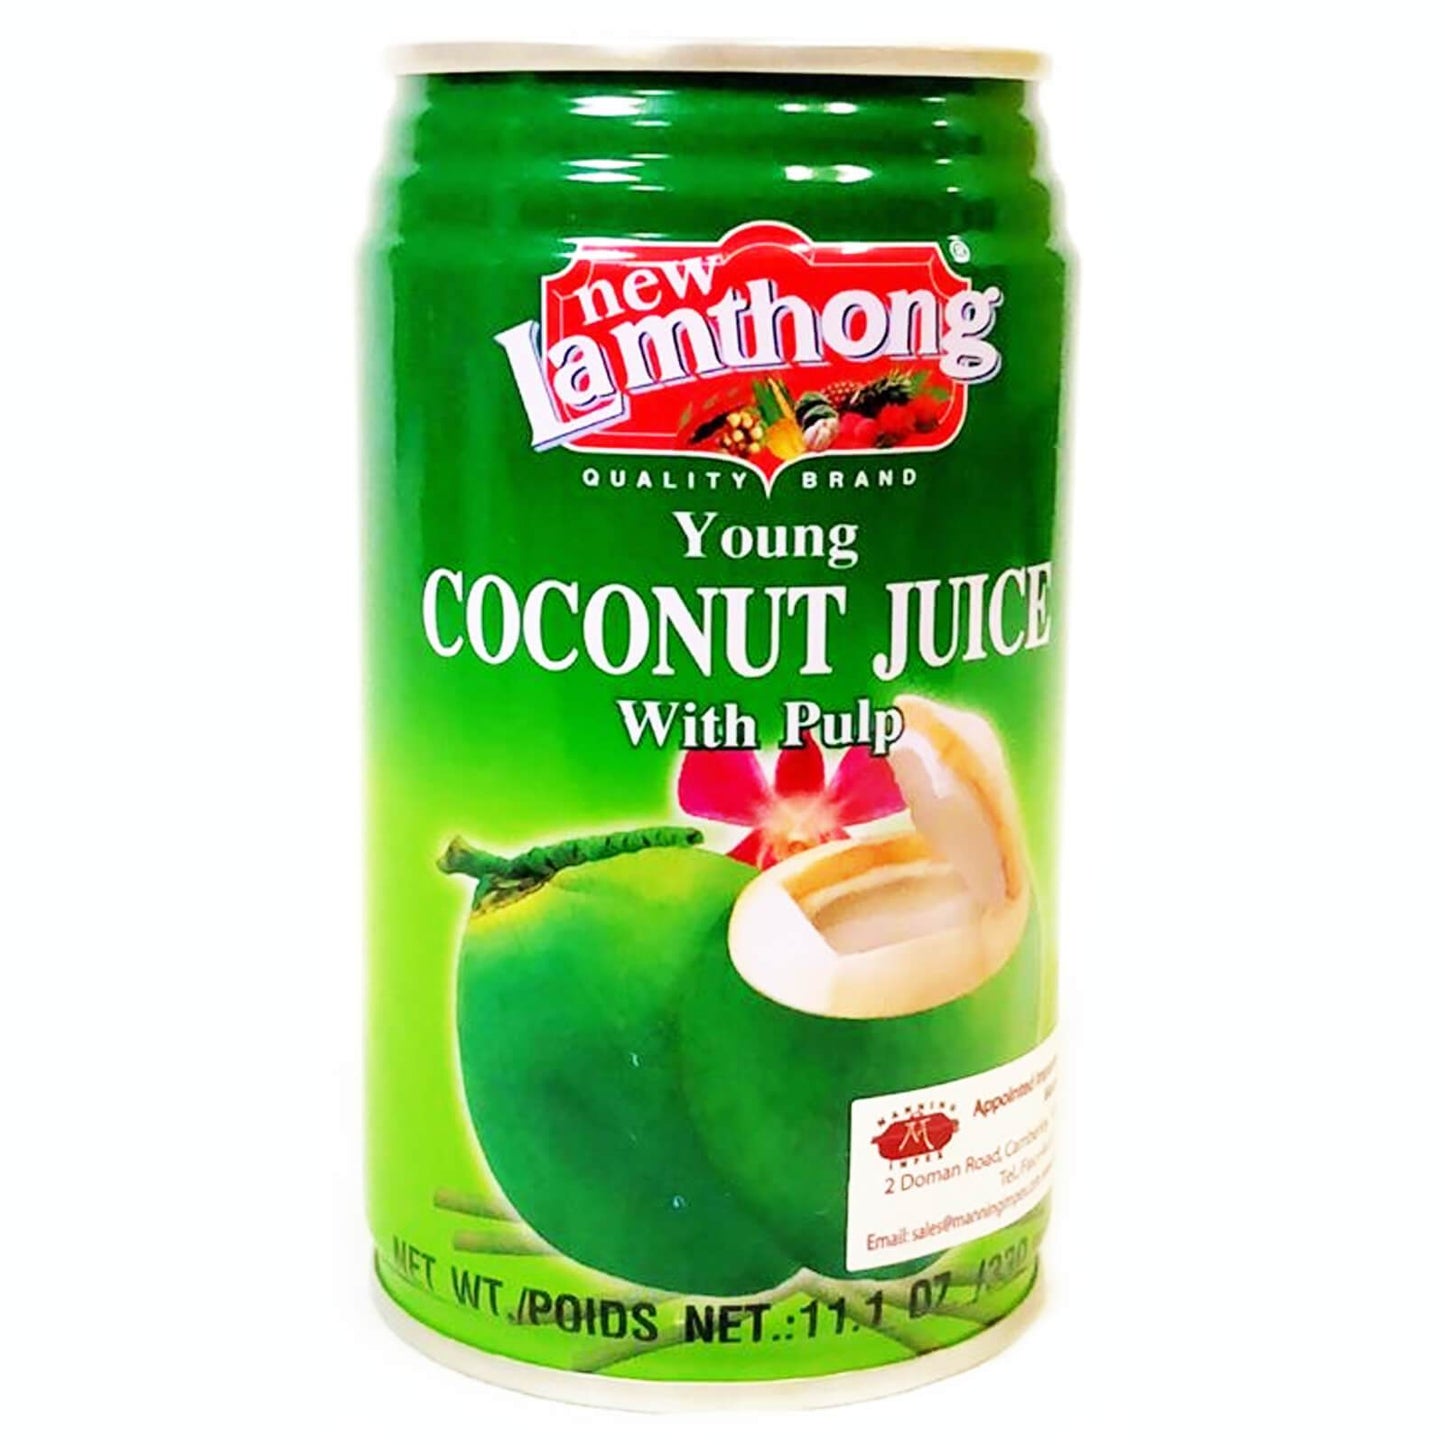 New Lamthong Young Coconut Juice with Pulp